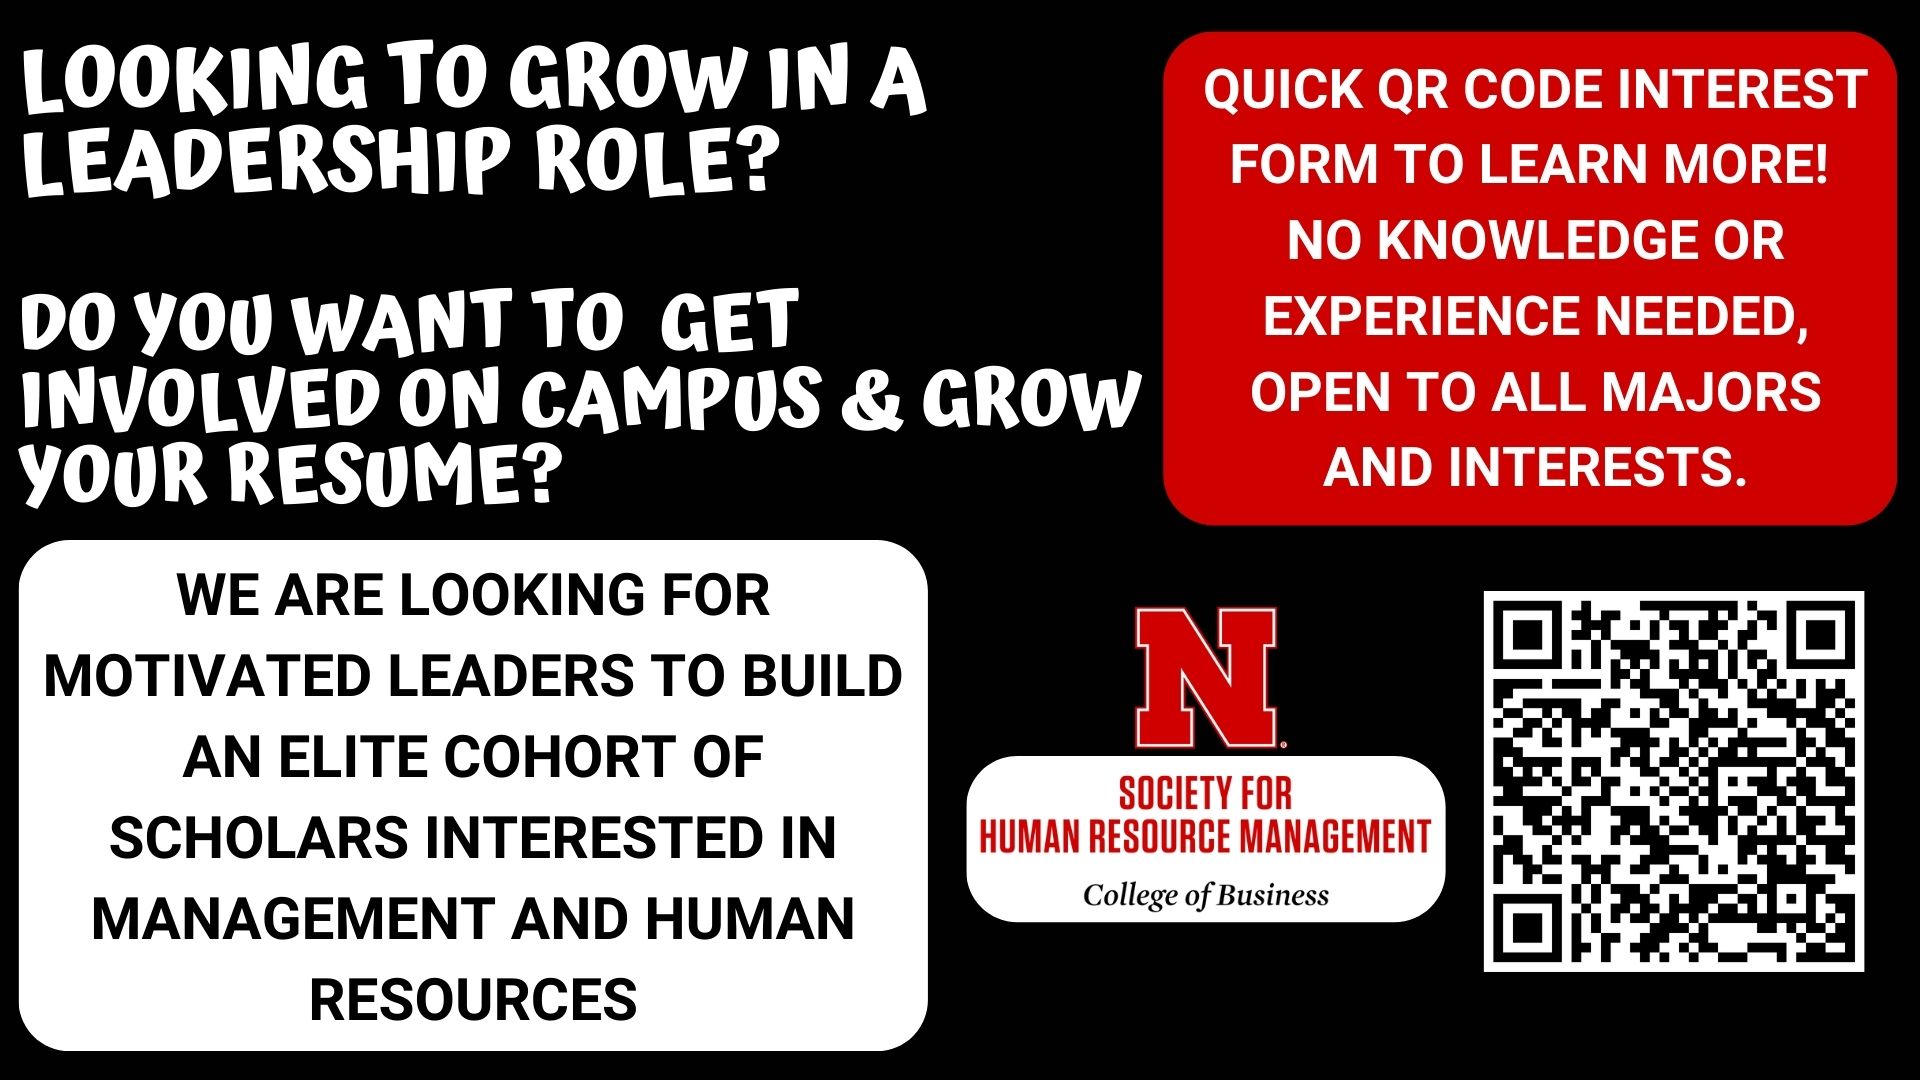 Society for Human Resource Management is Recruiting Leaders